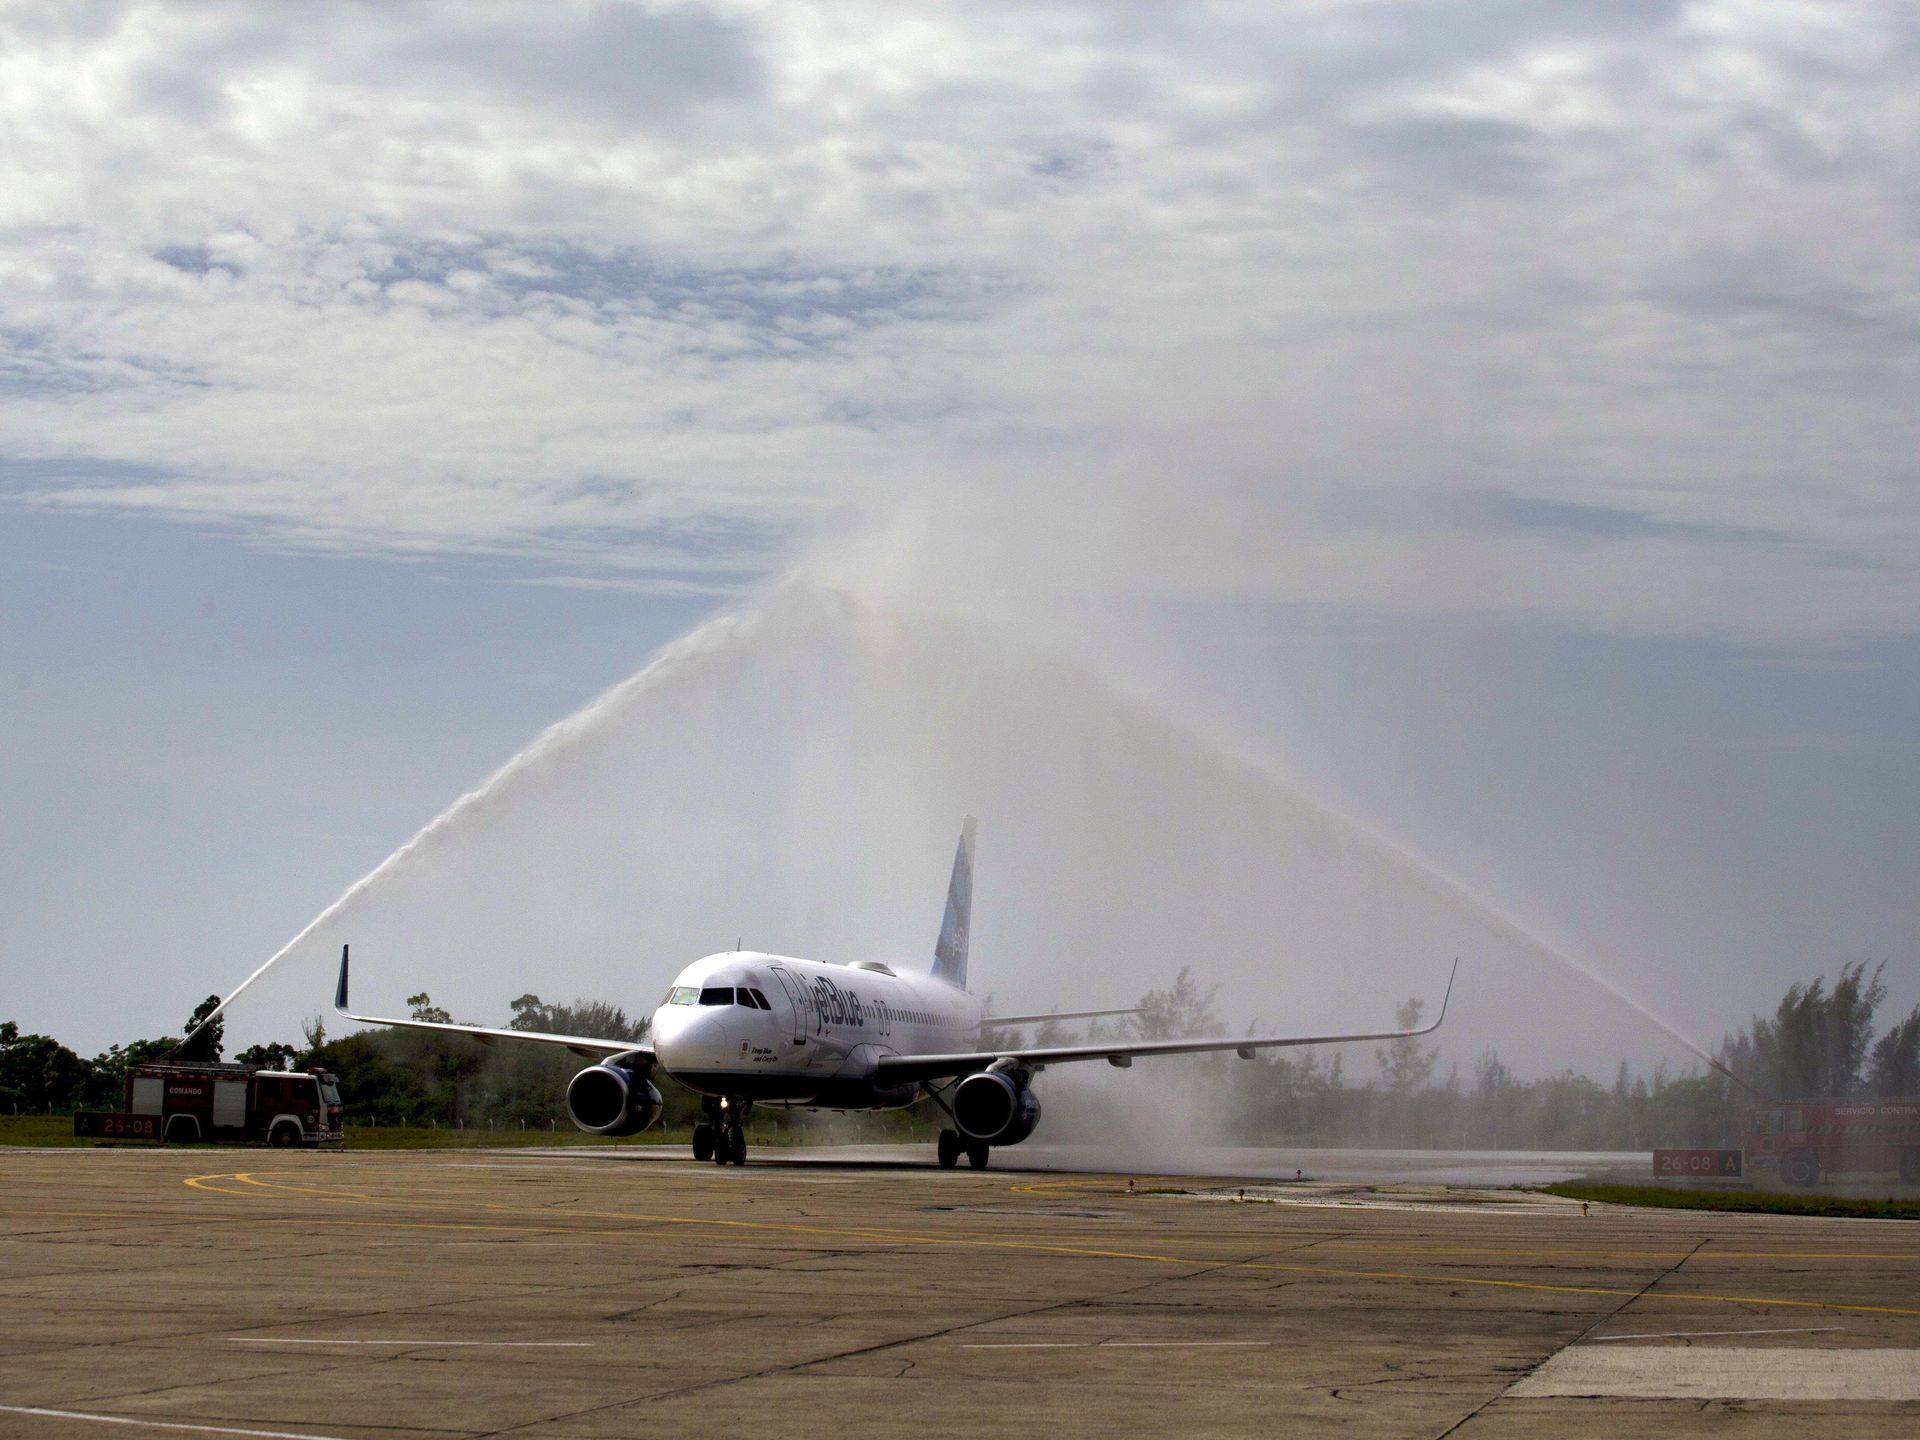 After landing in Santa Clara the JetBlue aeroplane received a ceremonial water canon shower from Cuban fire engines. Photo by USA Today.